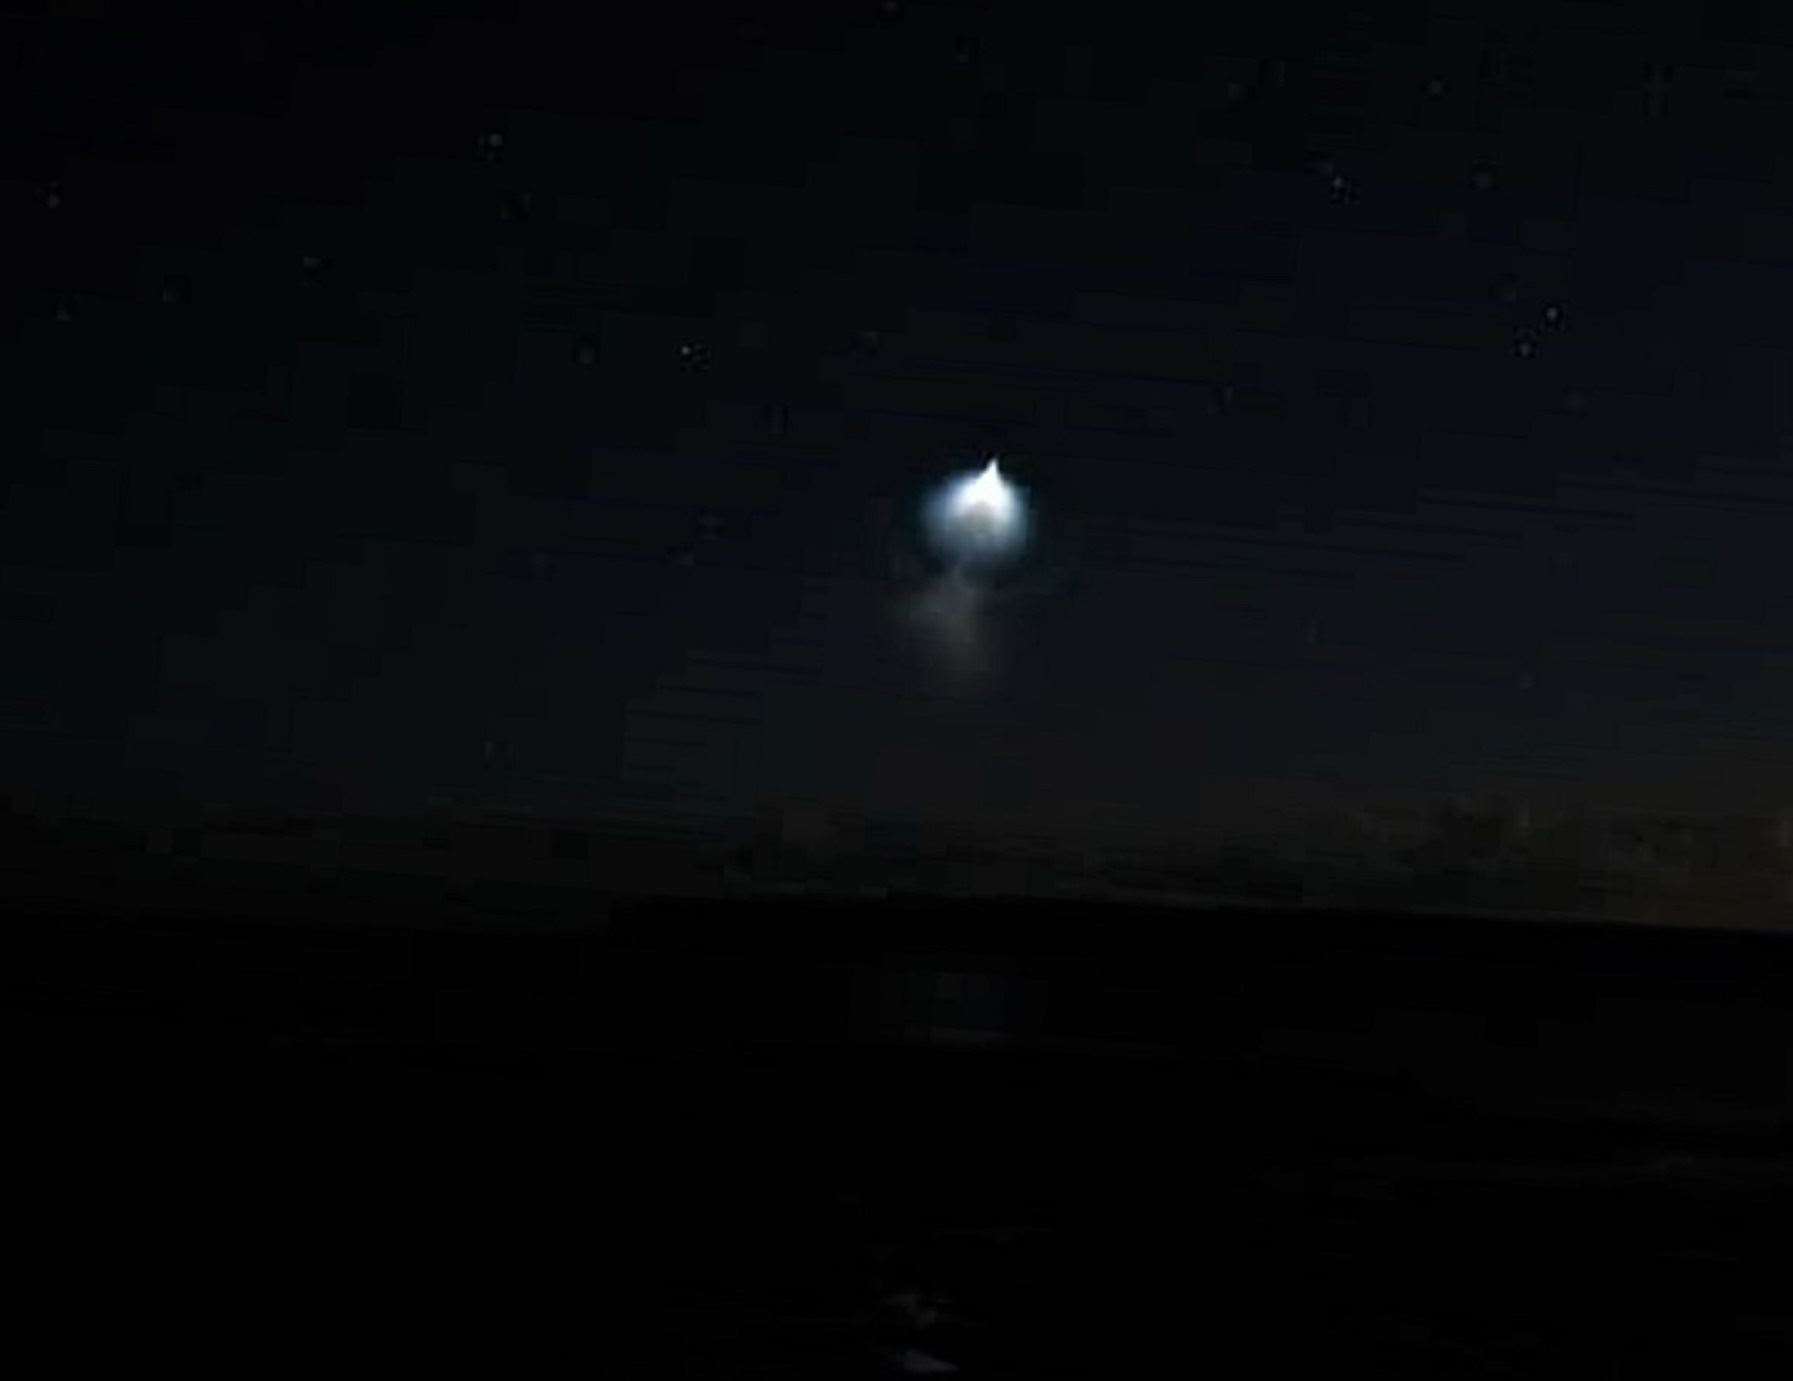 Picture posted by Caithness Astronomy Group last night with the same unusual light seen over Dunnet area.